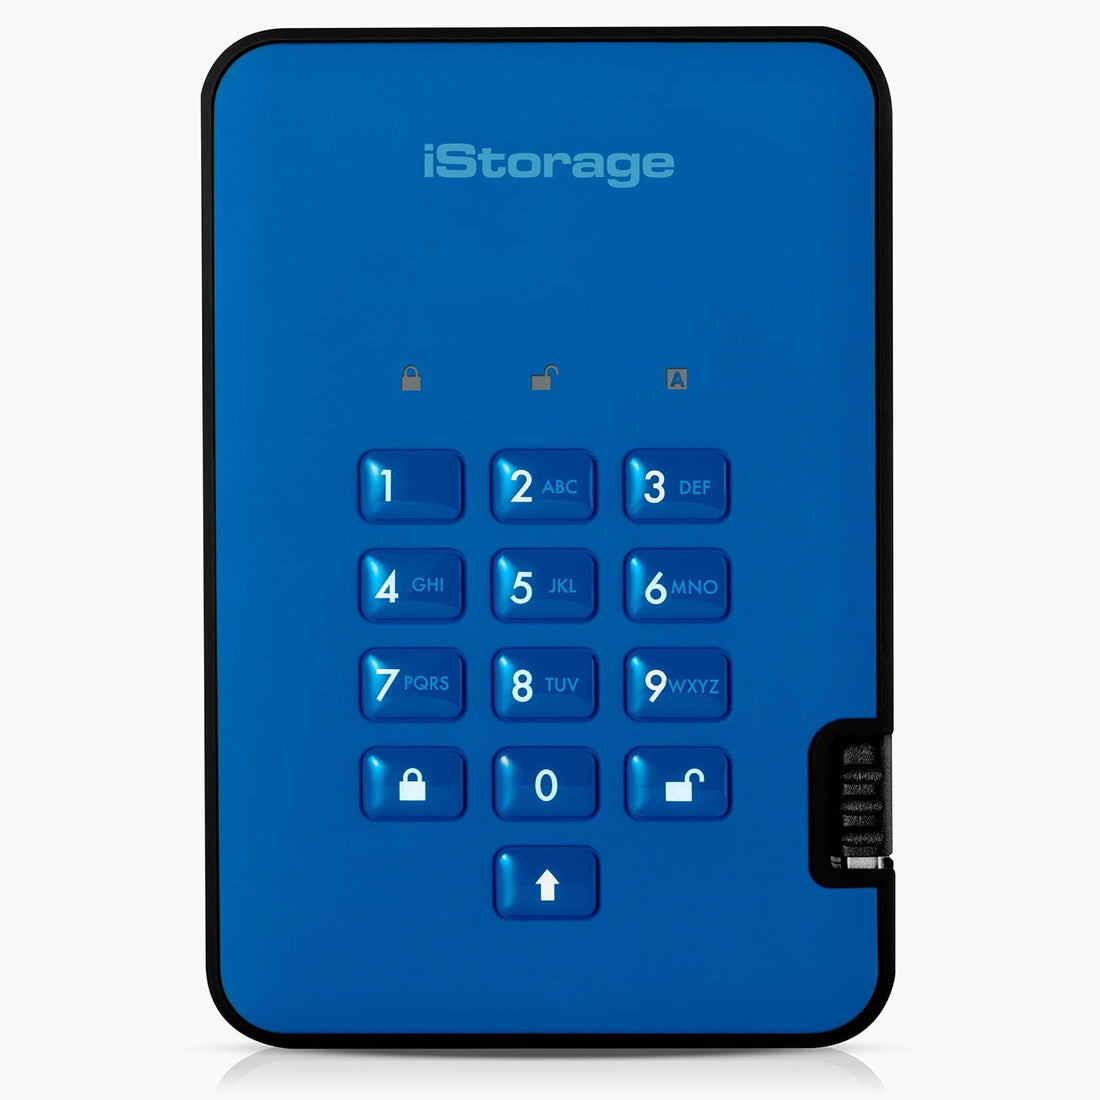 iStorage diskAshur2 HDD 3TB Blue - Secure portable hard drive - Password protected, dust and water resistant, portable, military grade hardware encryption USB 3.1 IS-DA2-256-3000-BE